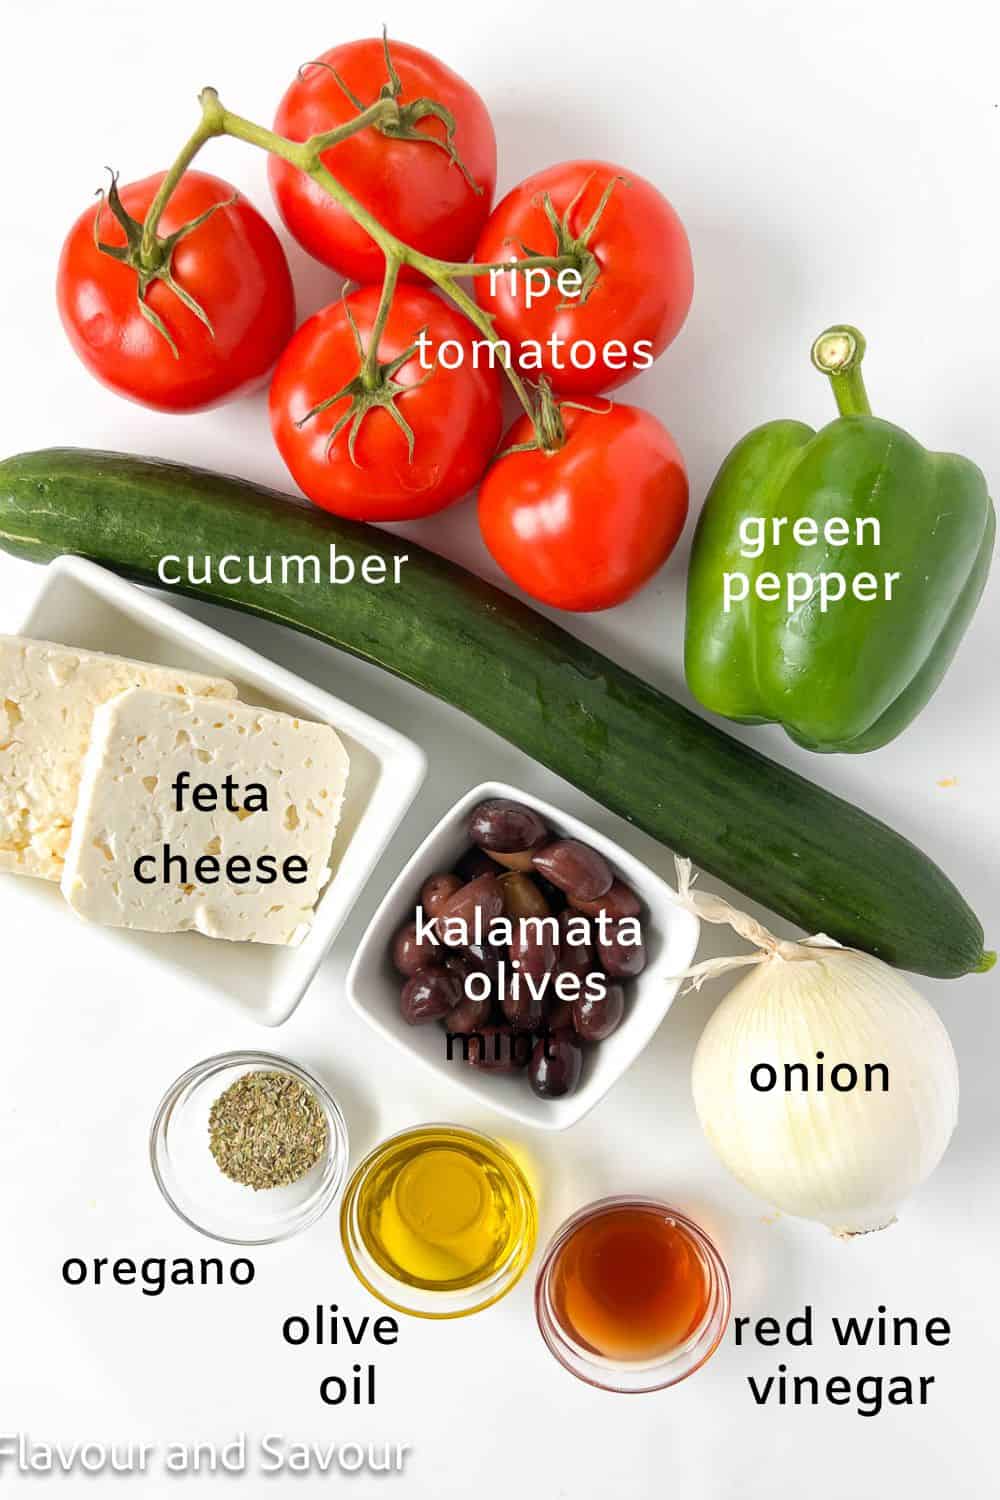 Labelled ingredients to make a traditional Greek salad:  tomatoes, cucumber, green pepper, feta cheese, kalamata olives, onion, dried oregano, olive oil and red wine vinegar.